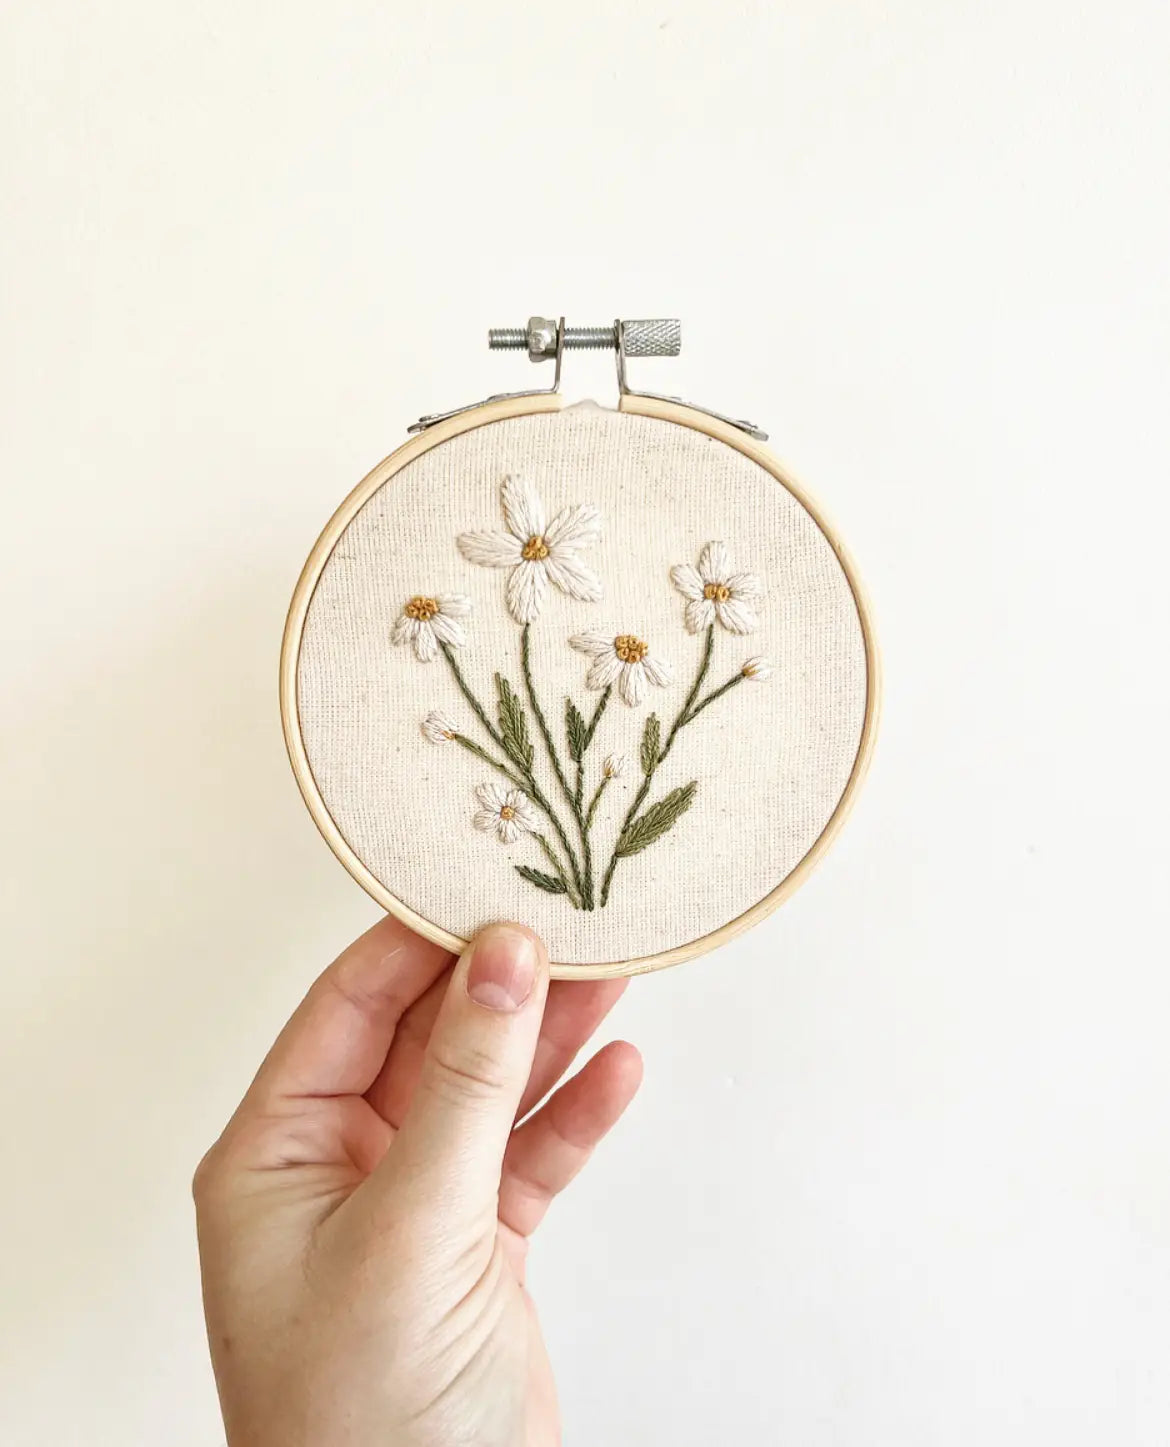 Wild Daisy Embroidery Kit - Mindful Mantra Embroidery